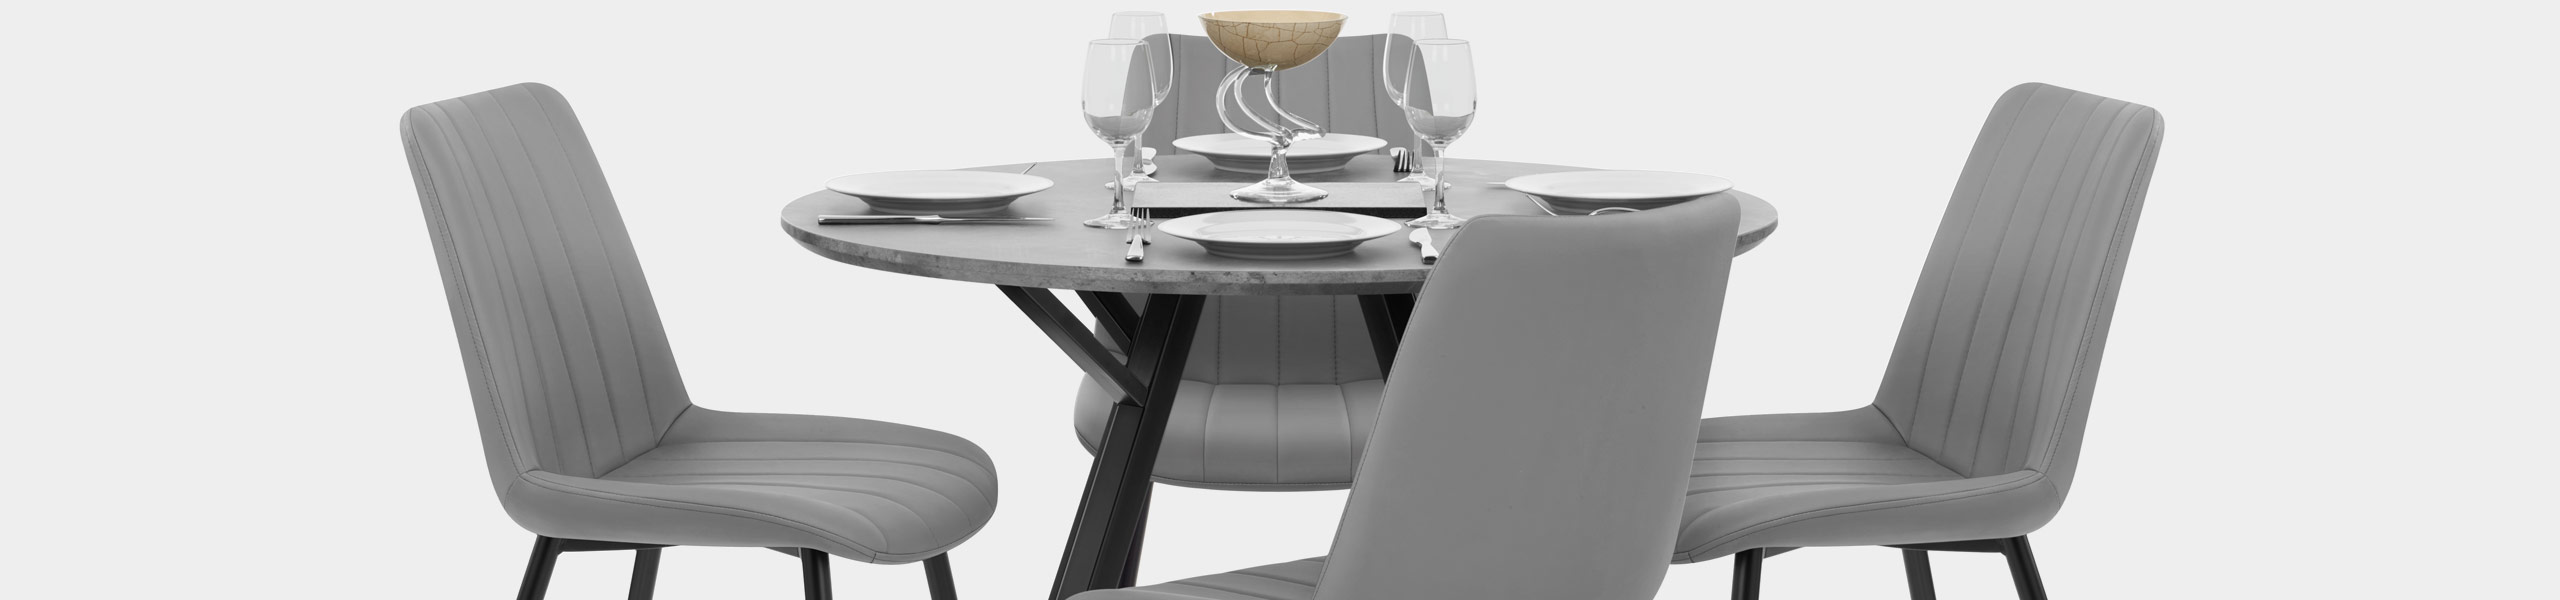 Sussex Dining Set Concrete & Mid Grey Video Banner